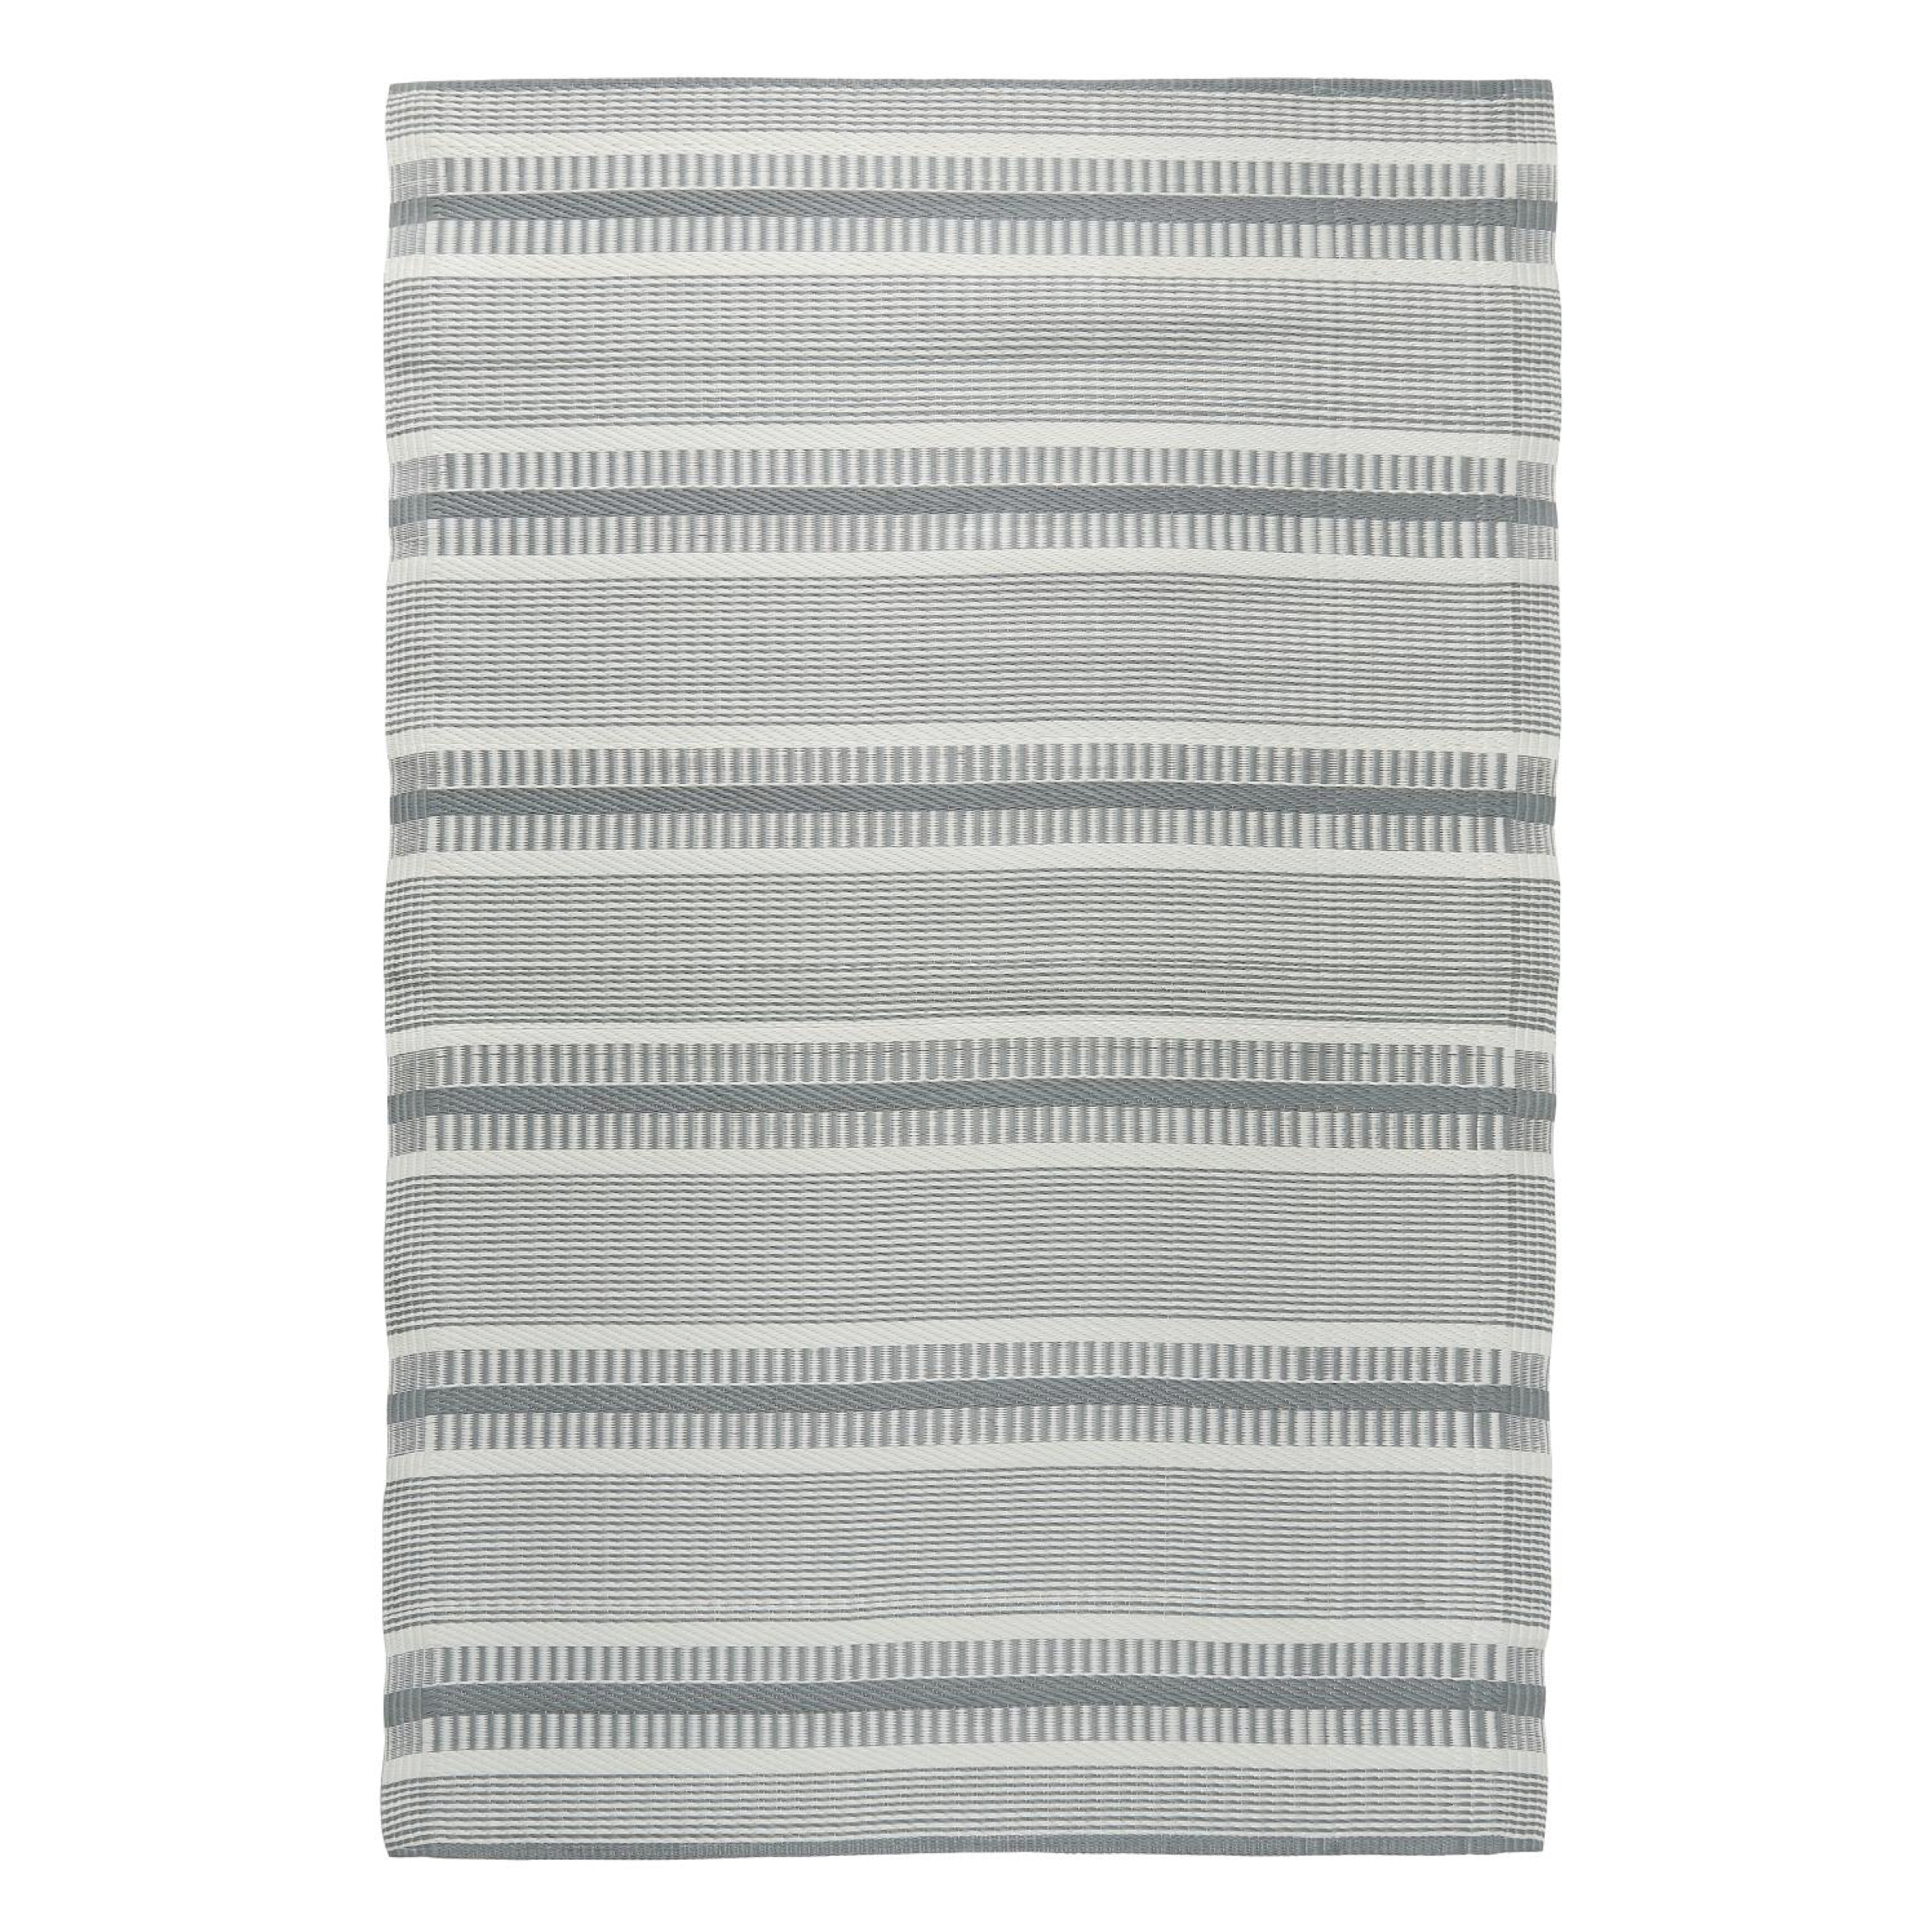 Ib Laursen Striped Rug in Recycled Plastic - Grey 